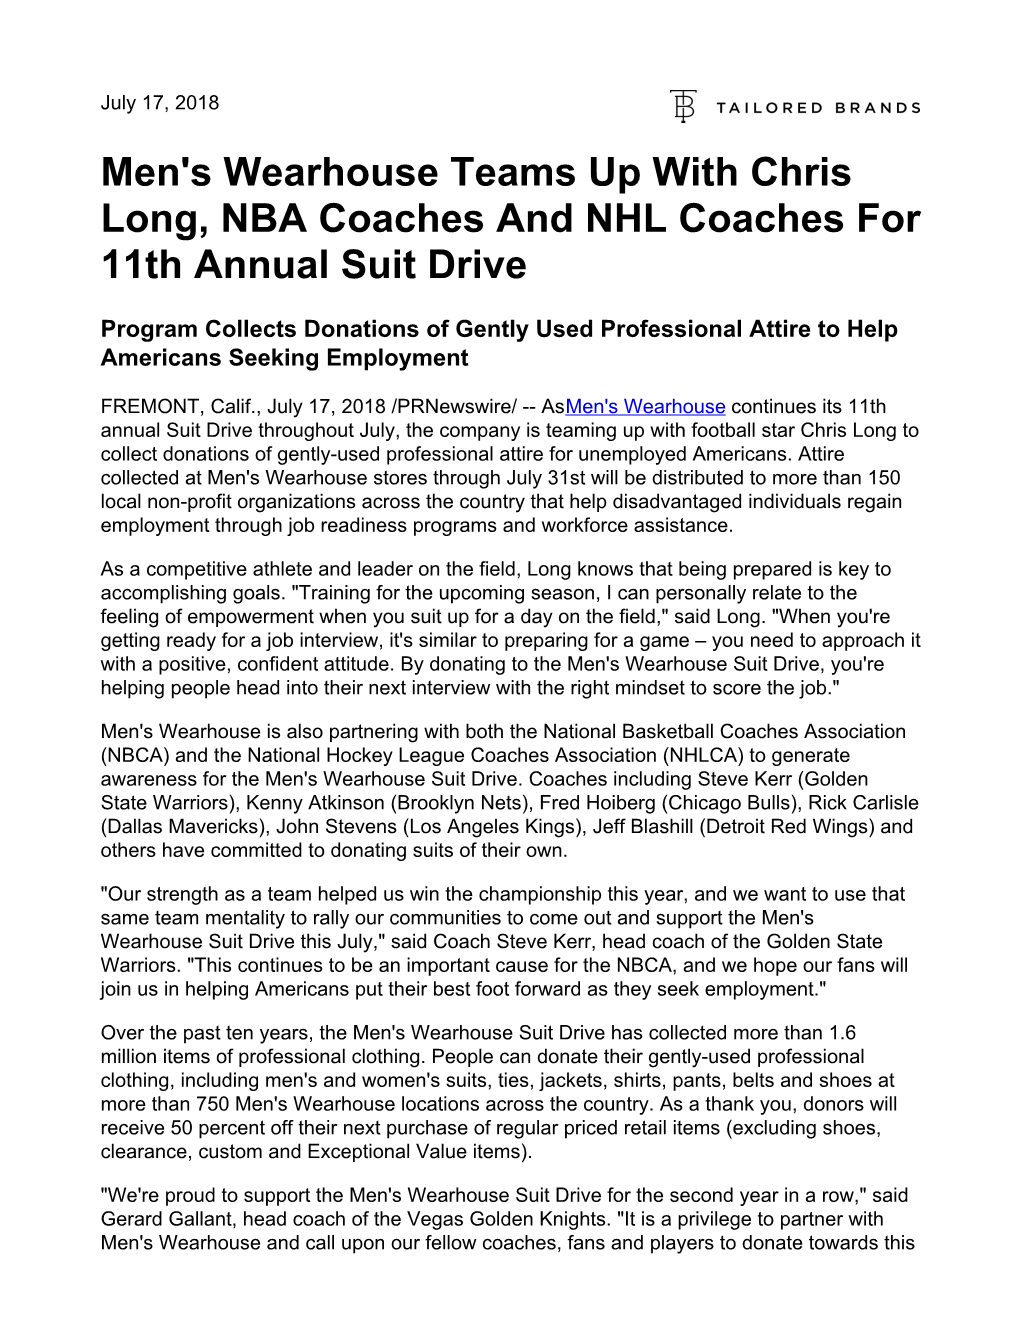 Men's Wearhouse Teams up with Chris Long, NBA Coaches and NHL Coaches for 11Th Annual Suit Drive